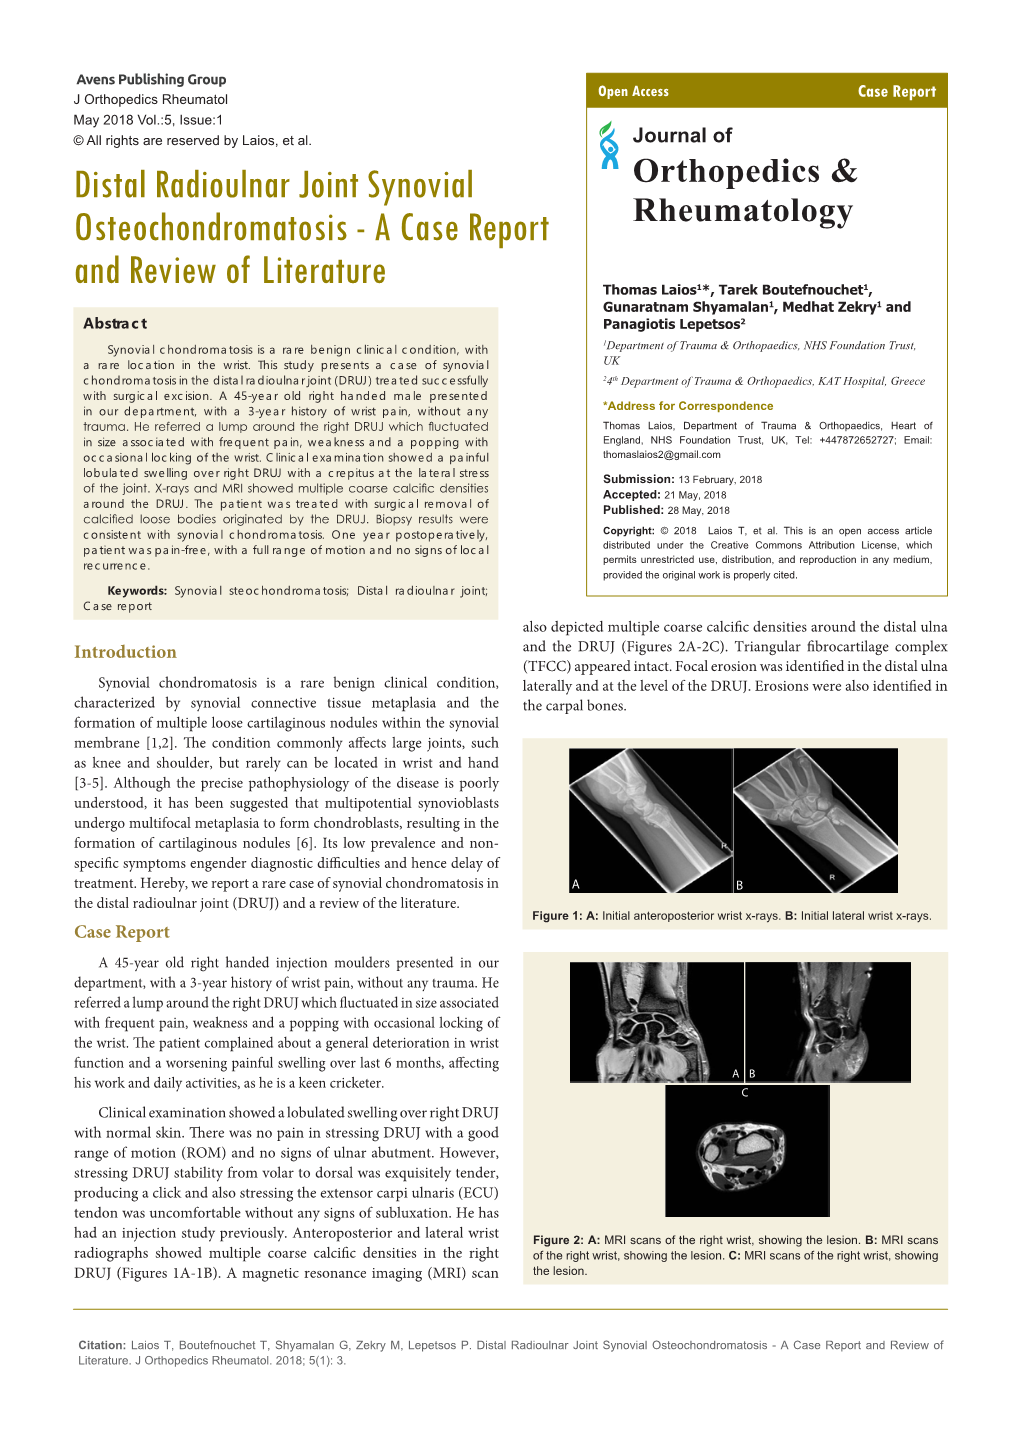 Distal Radioulnar Joint Synovial Osteochondromatosis - a Case Report and Review of Literature